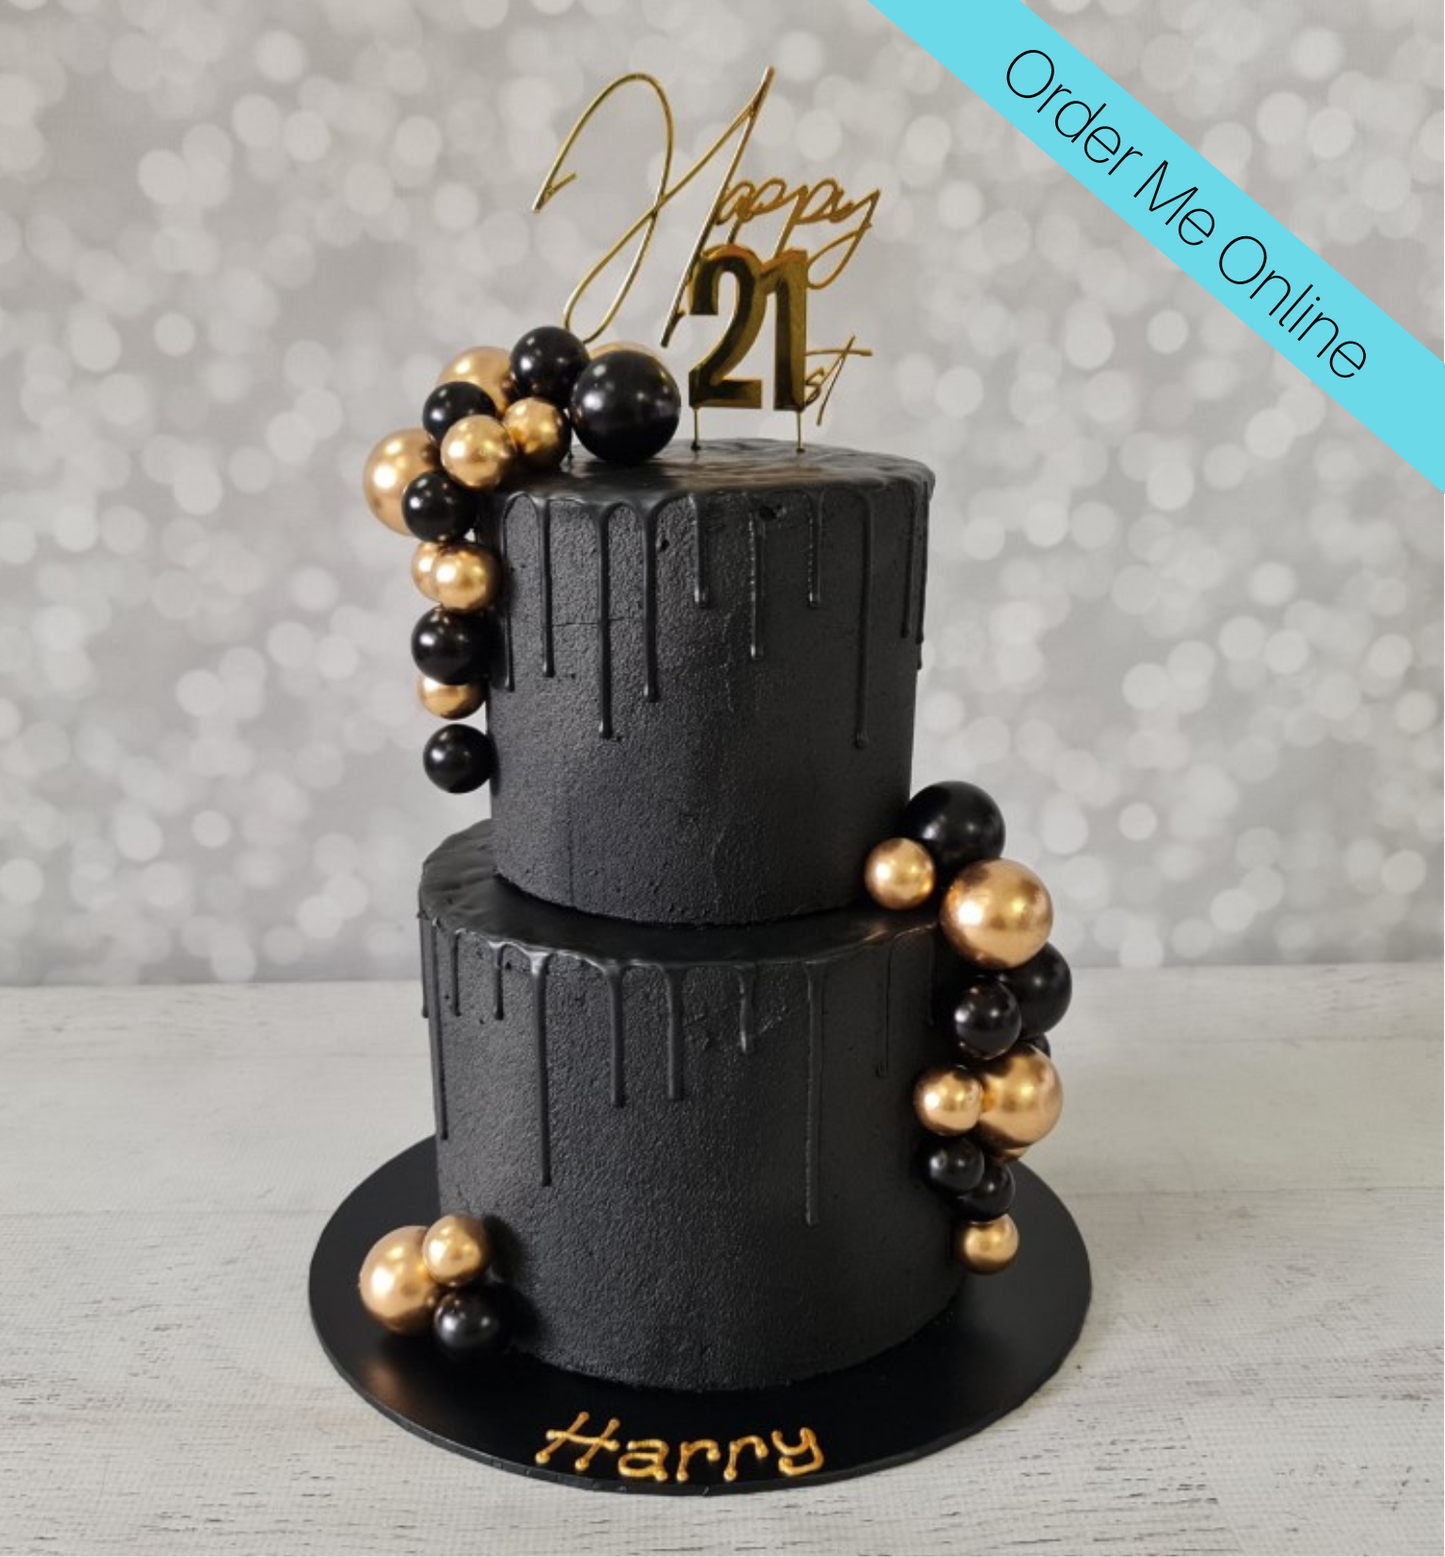 21st Birthday Cake - Buy Online, Free UK Delivery — New Cakes